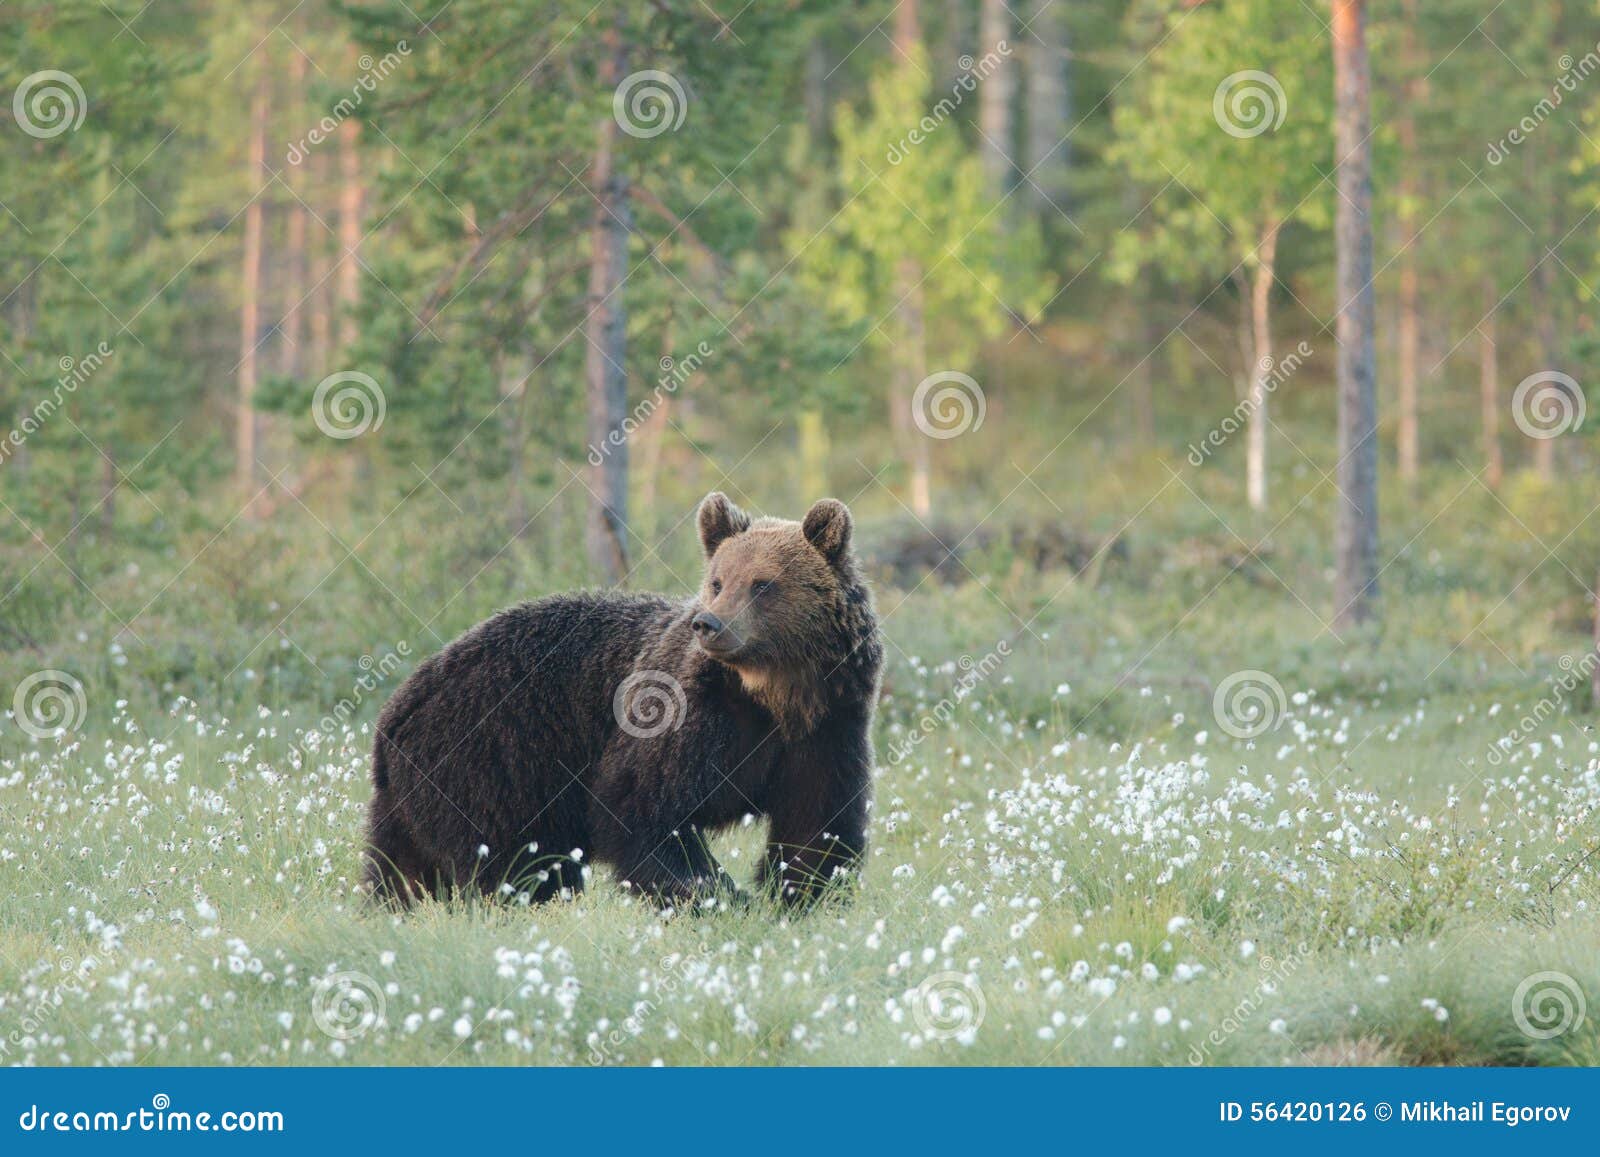 brown bear going and watching